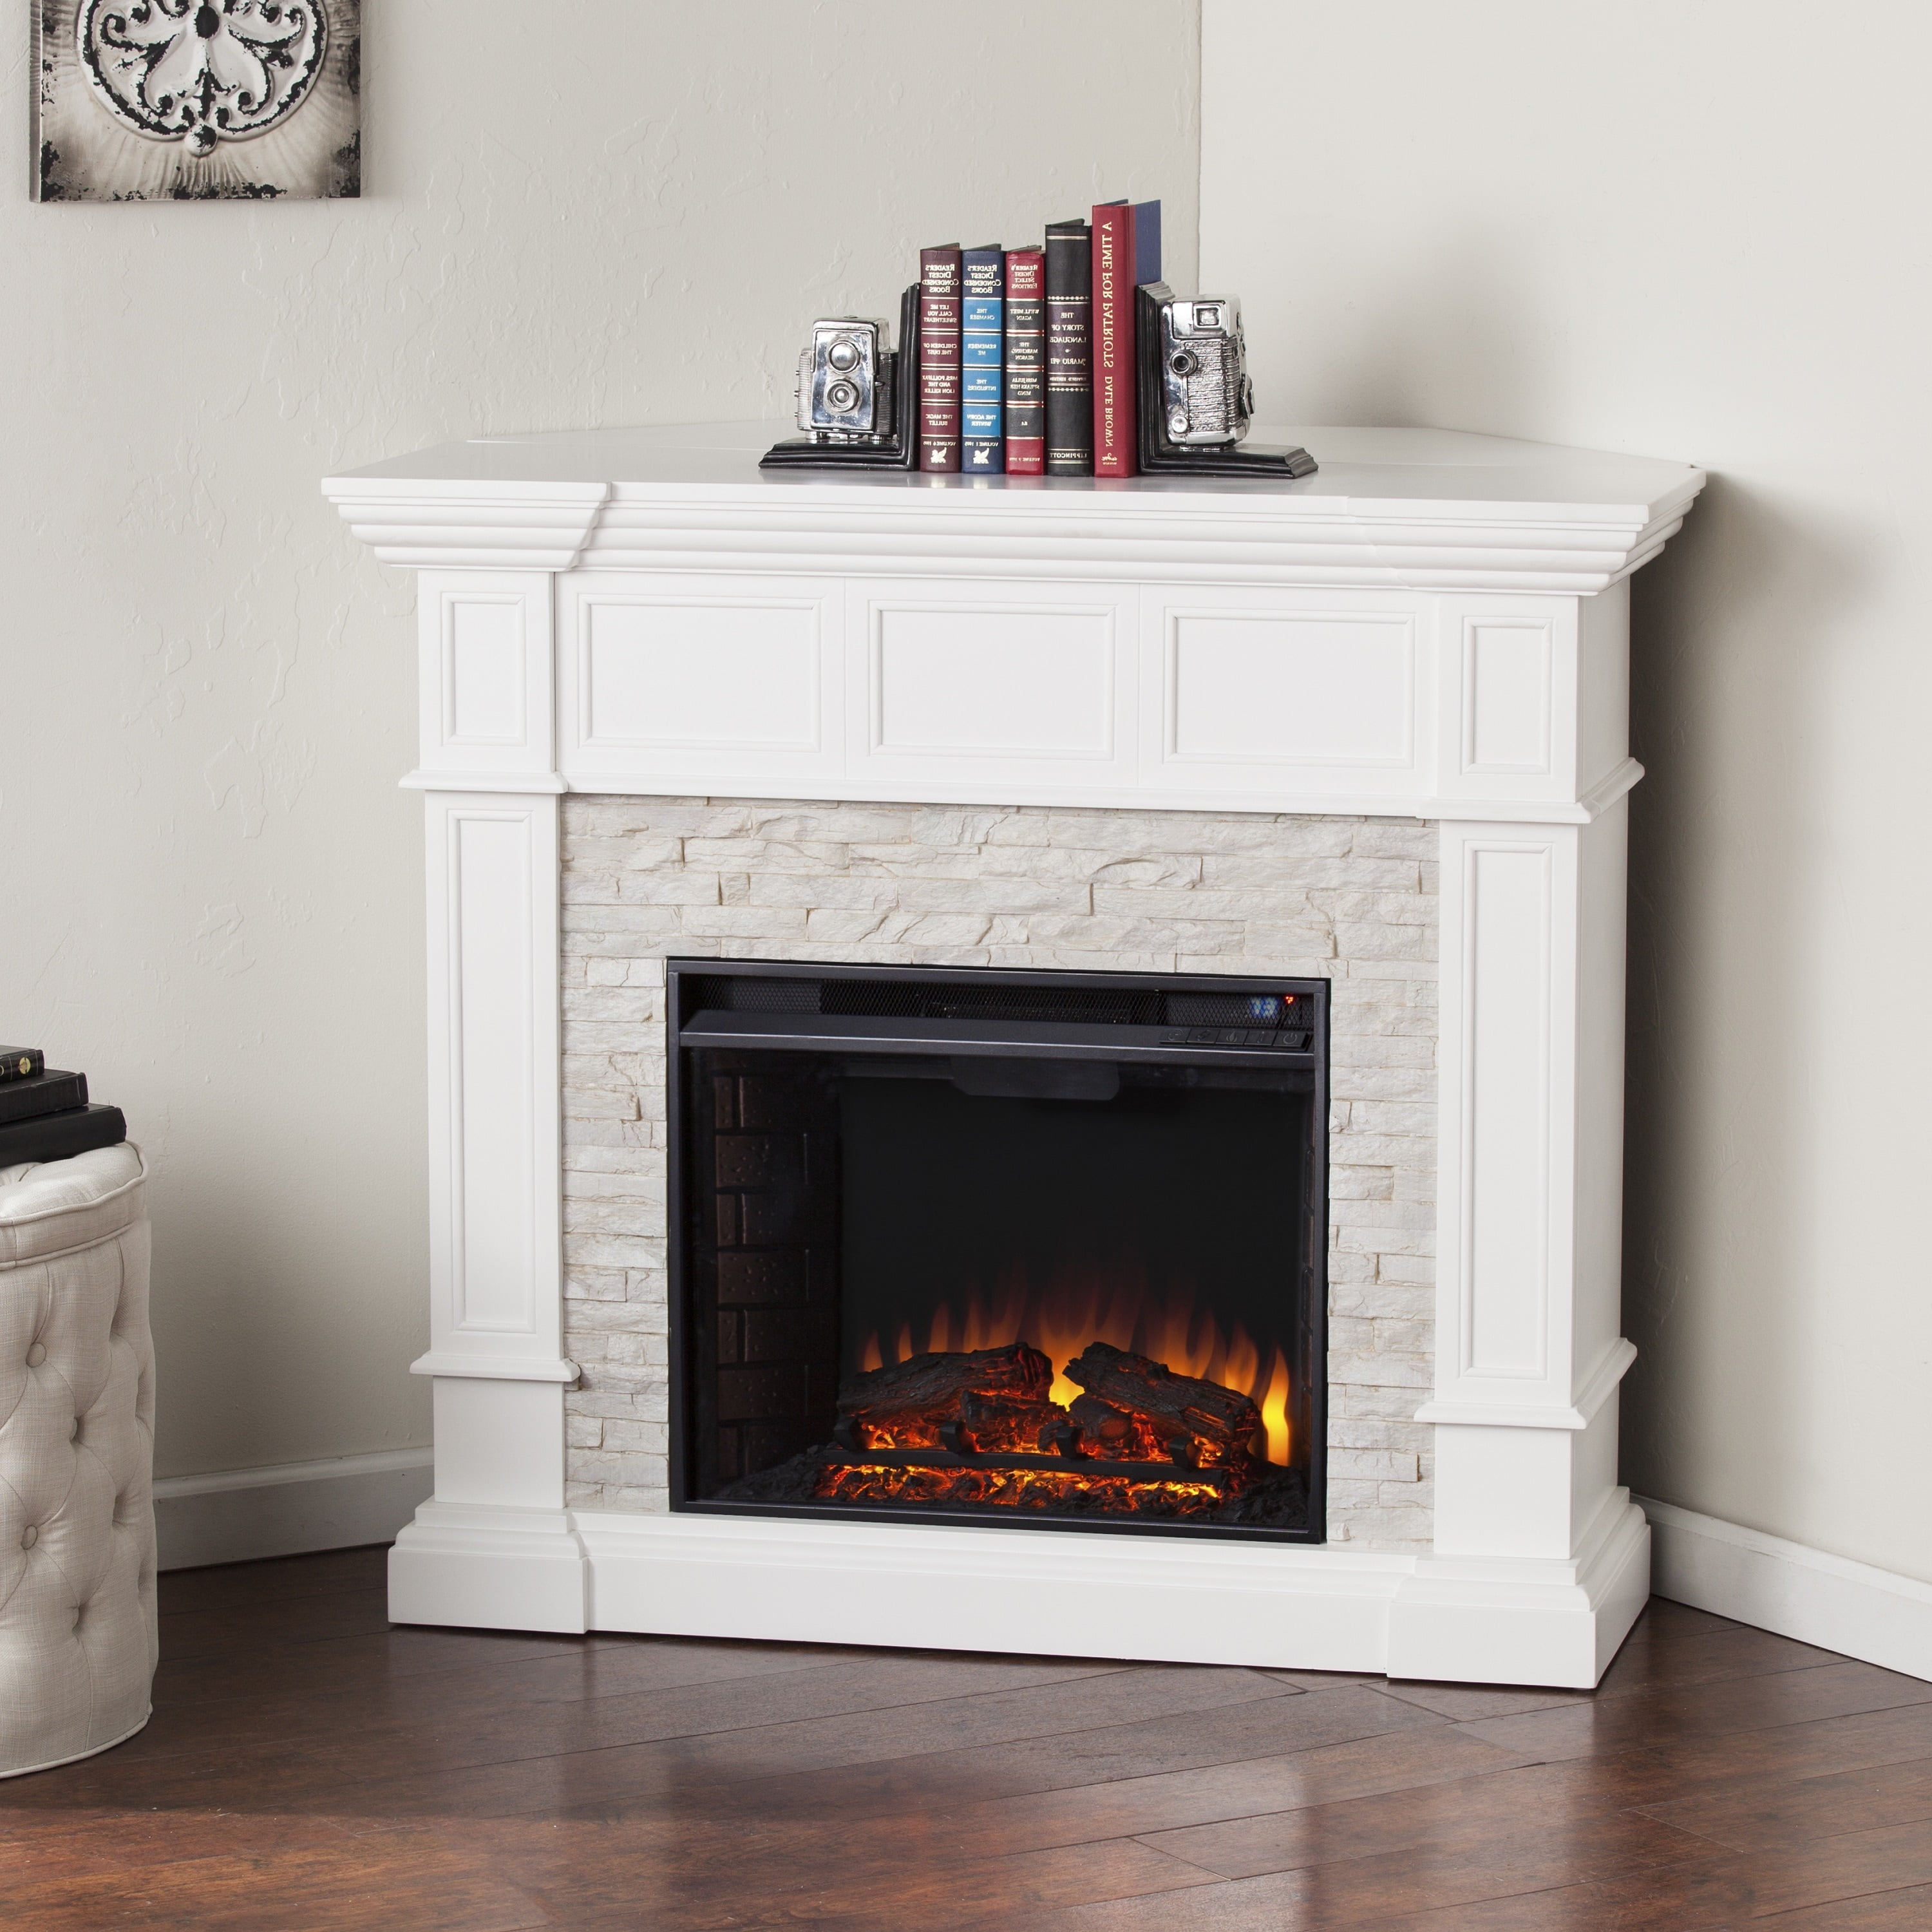 Oliver & James Lochner White Faux Stone Corner Convertible Electric